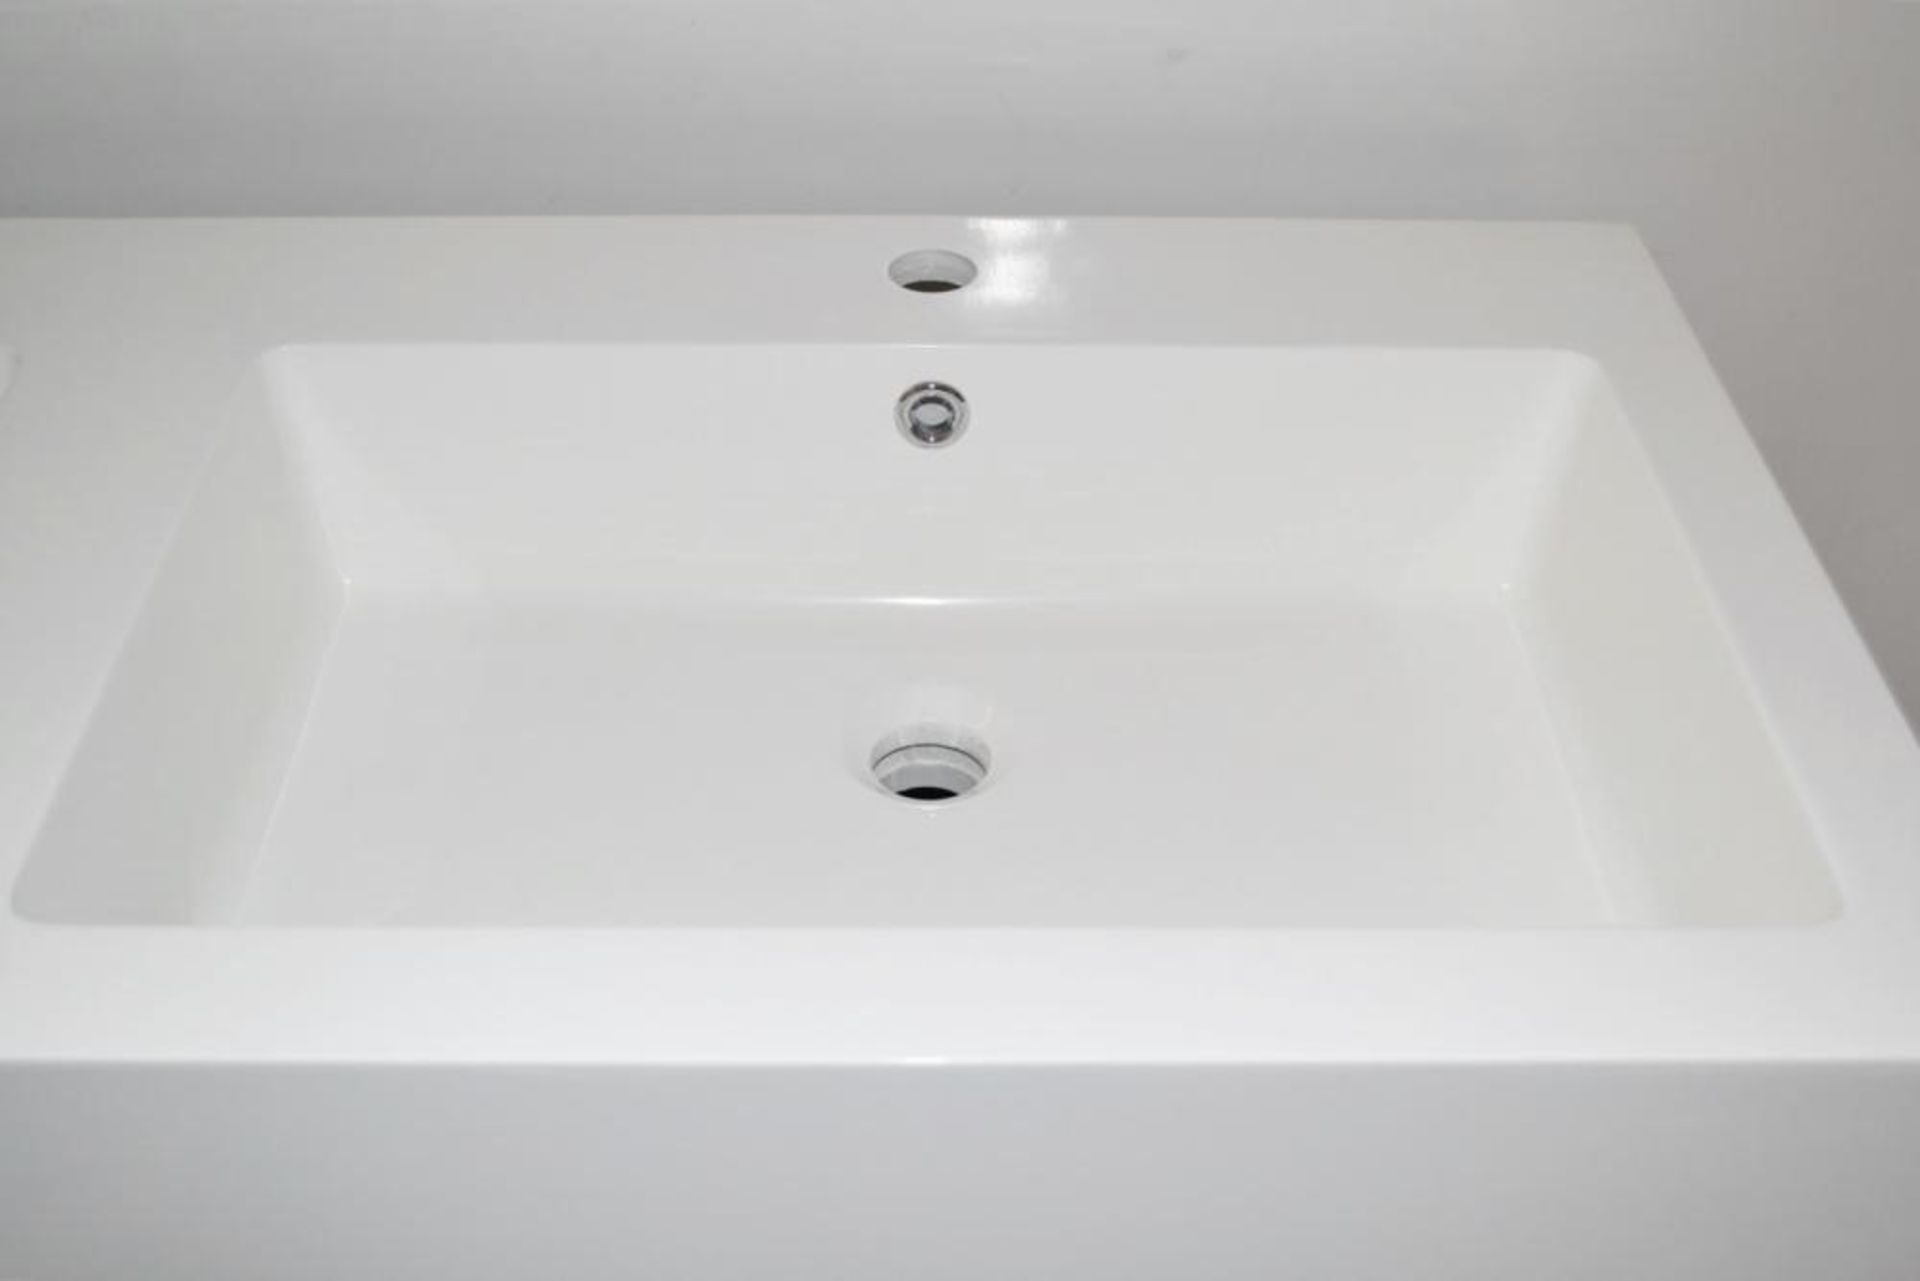 1 x Gloss White 1200mm 4-Door Double Basin Freestanding Bathroom Cabinet - New & Boxed Stock - CL307 - Image 2 of 6